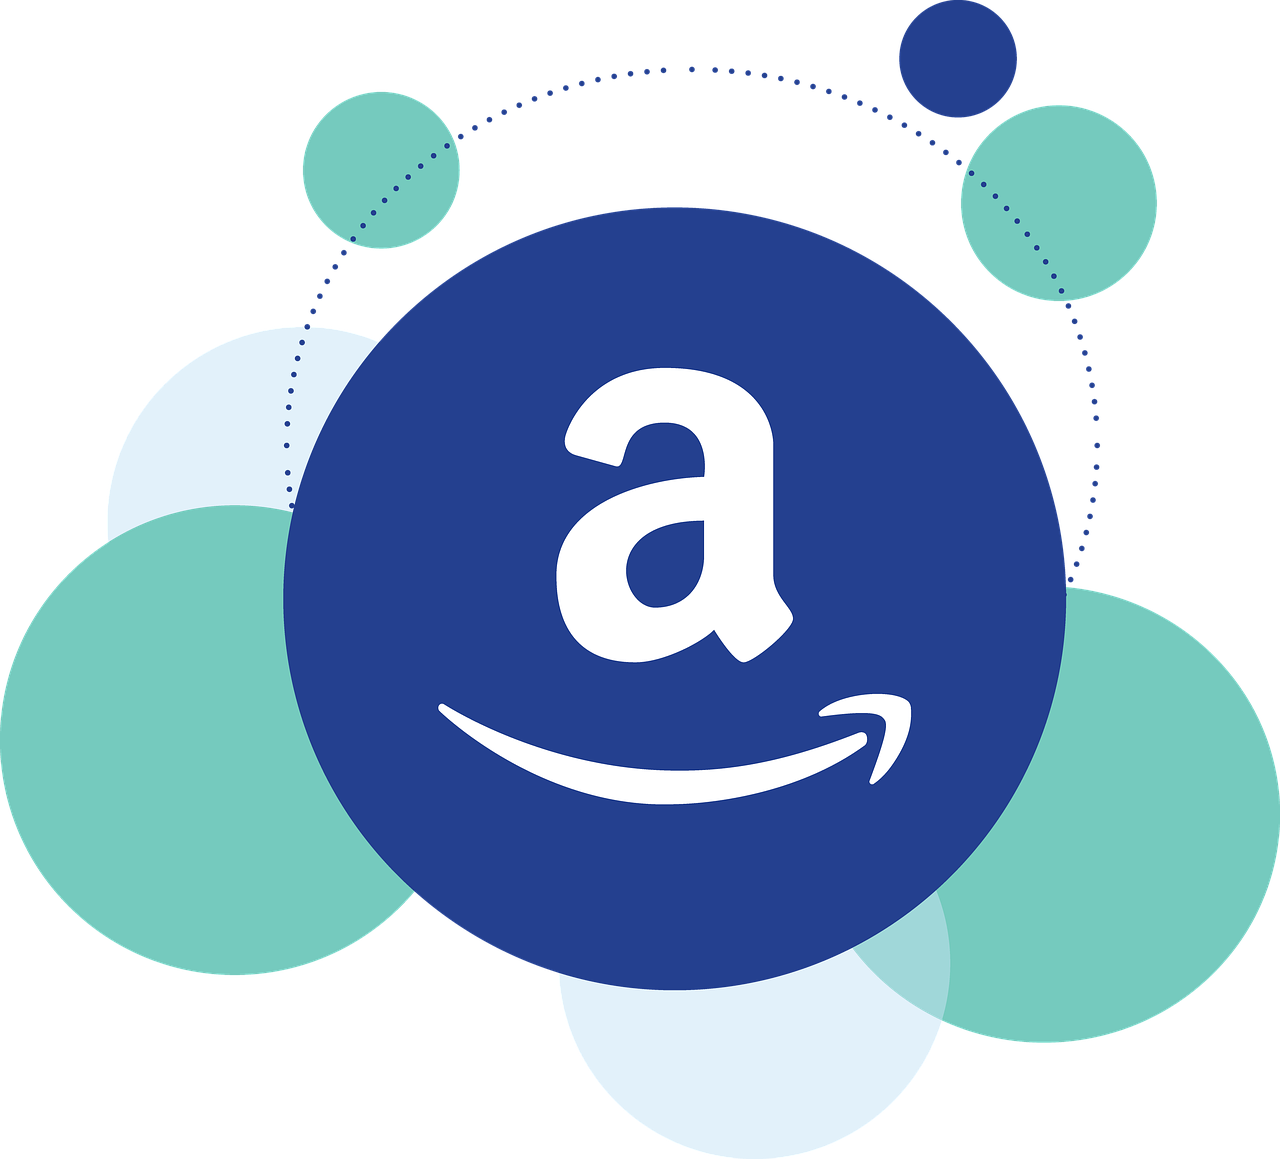 The benefits of working with an Amazon consultant